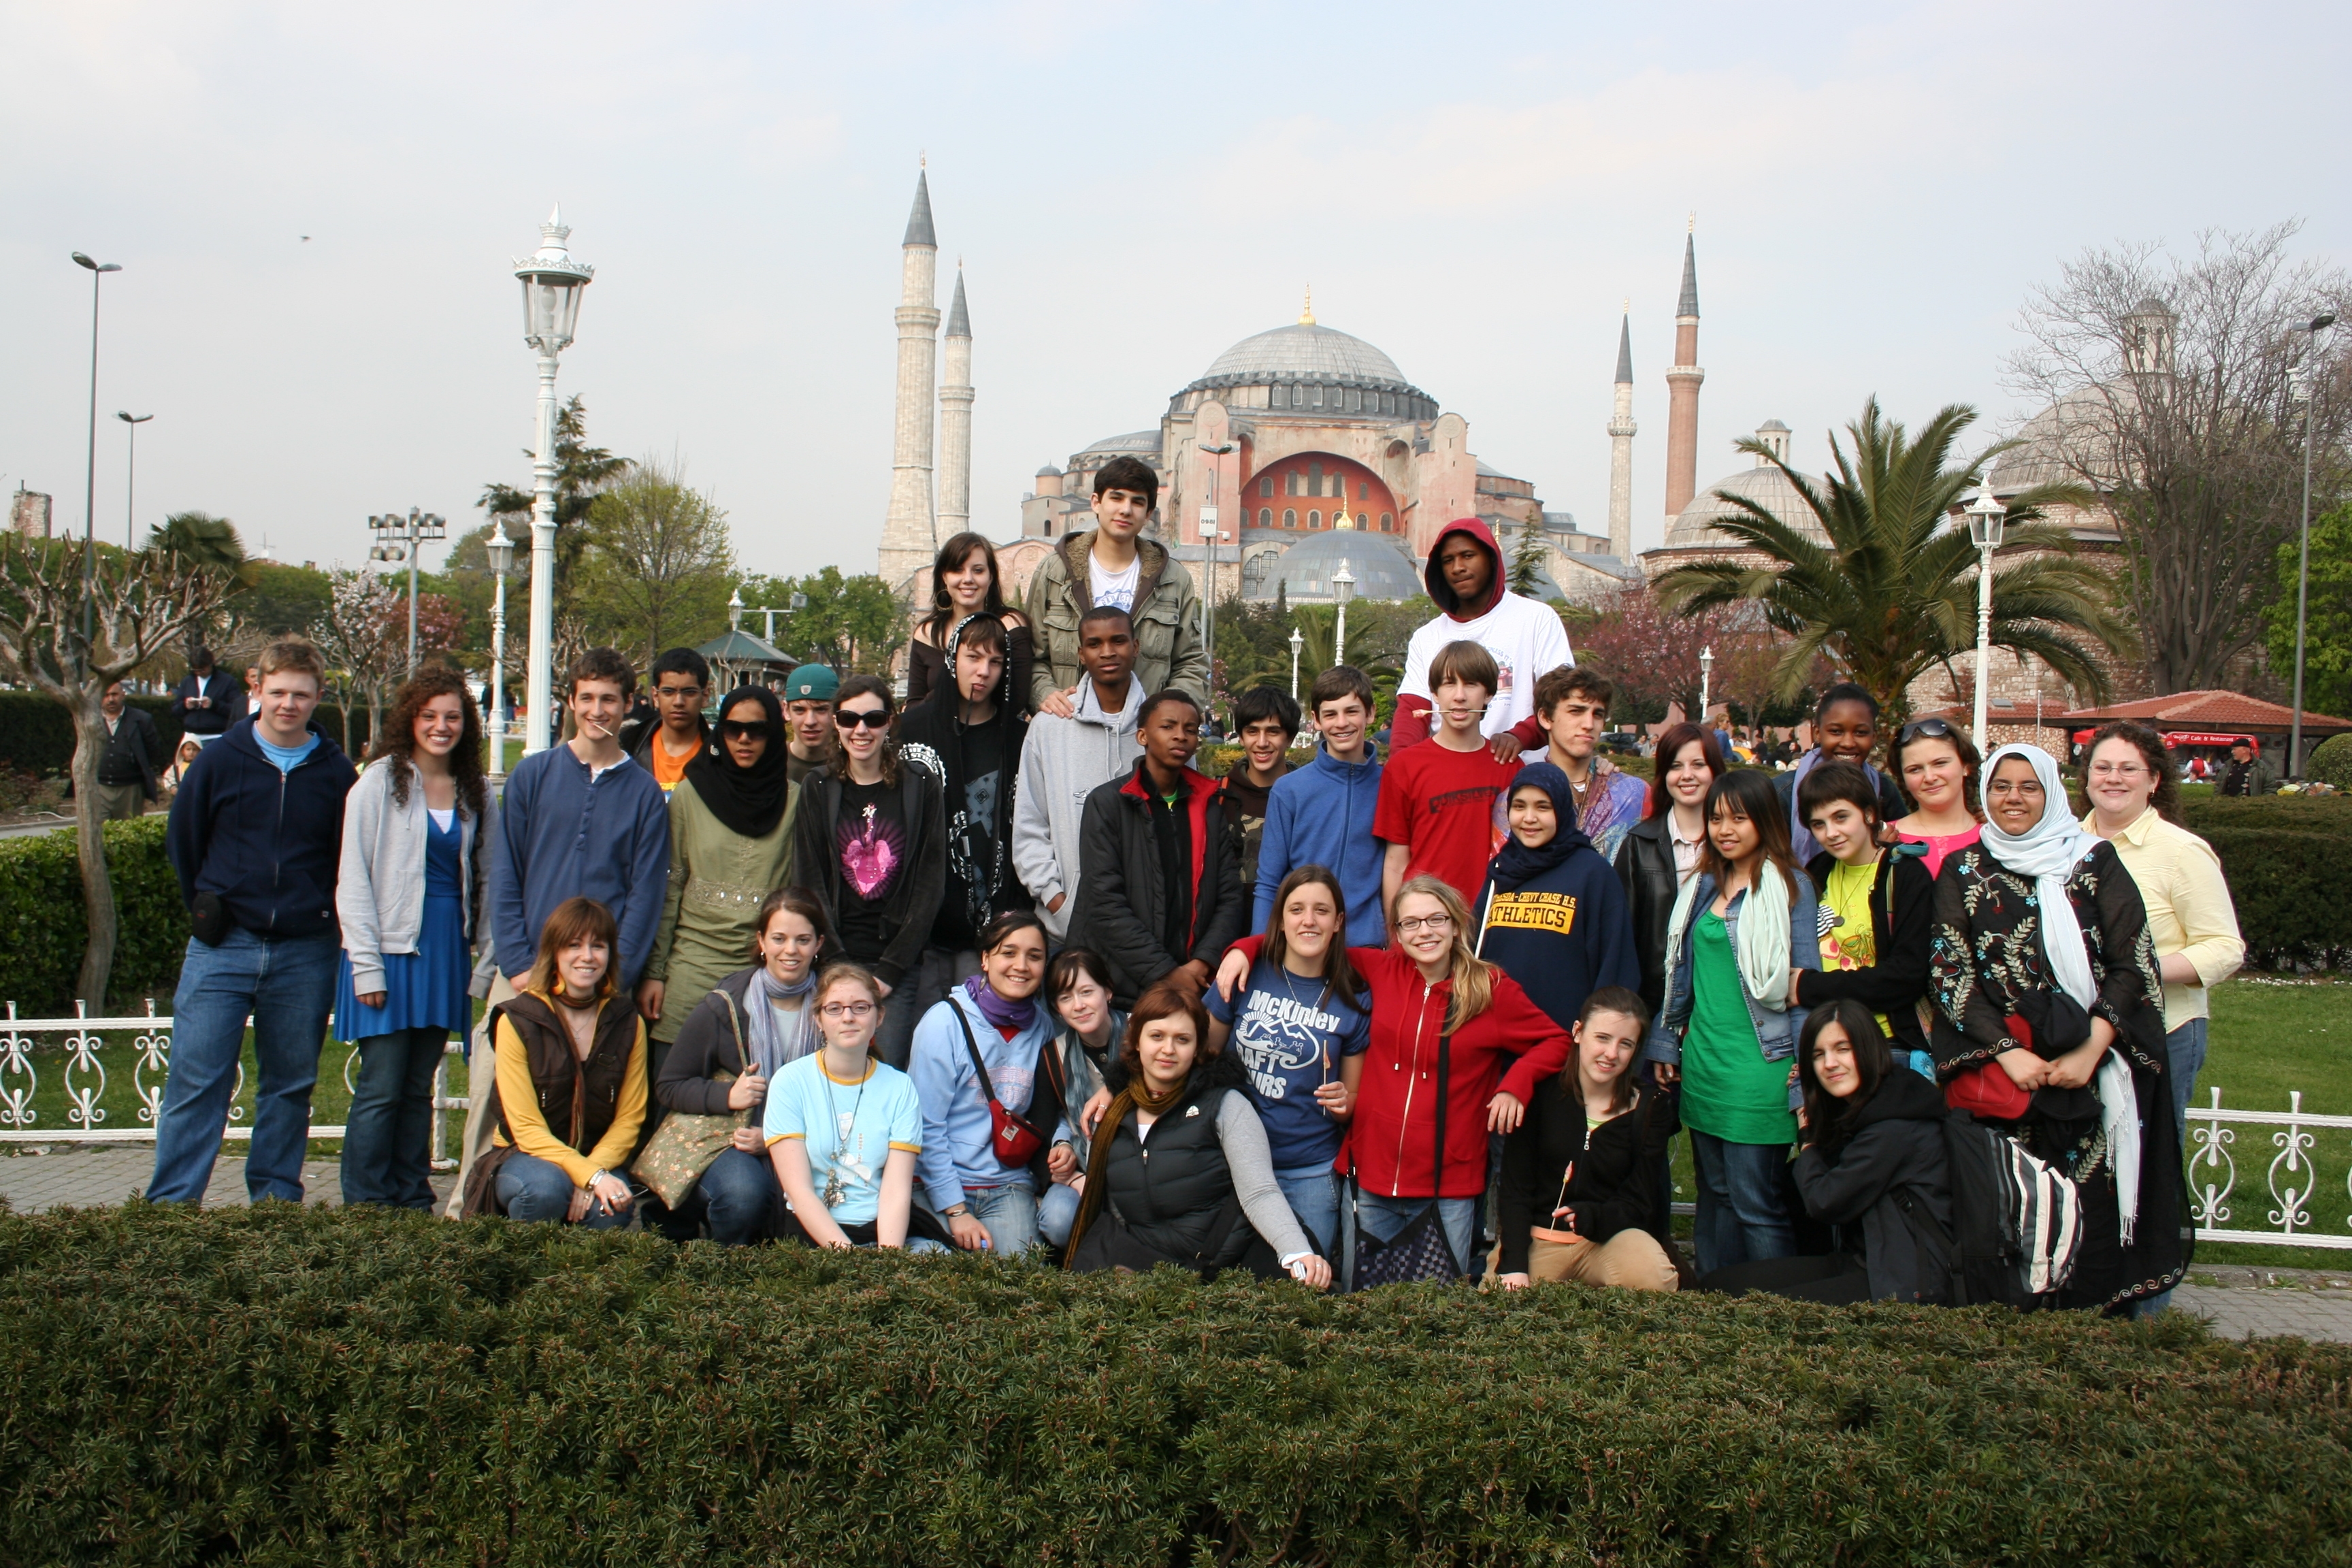 group picture in front of Hagia Sofia, Istanbul